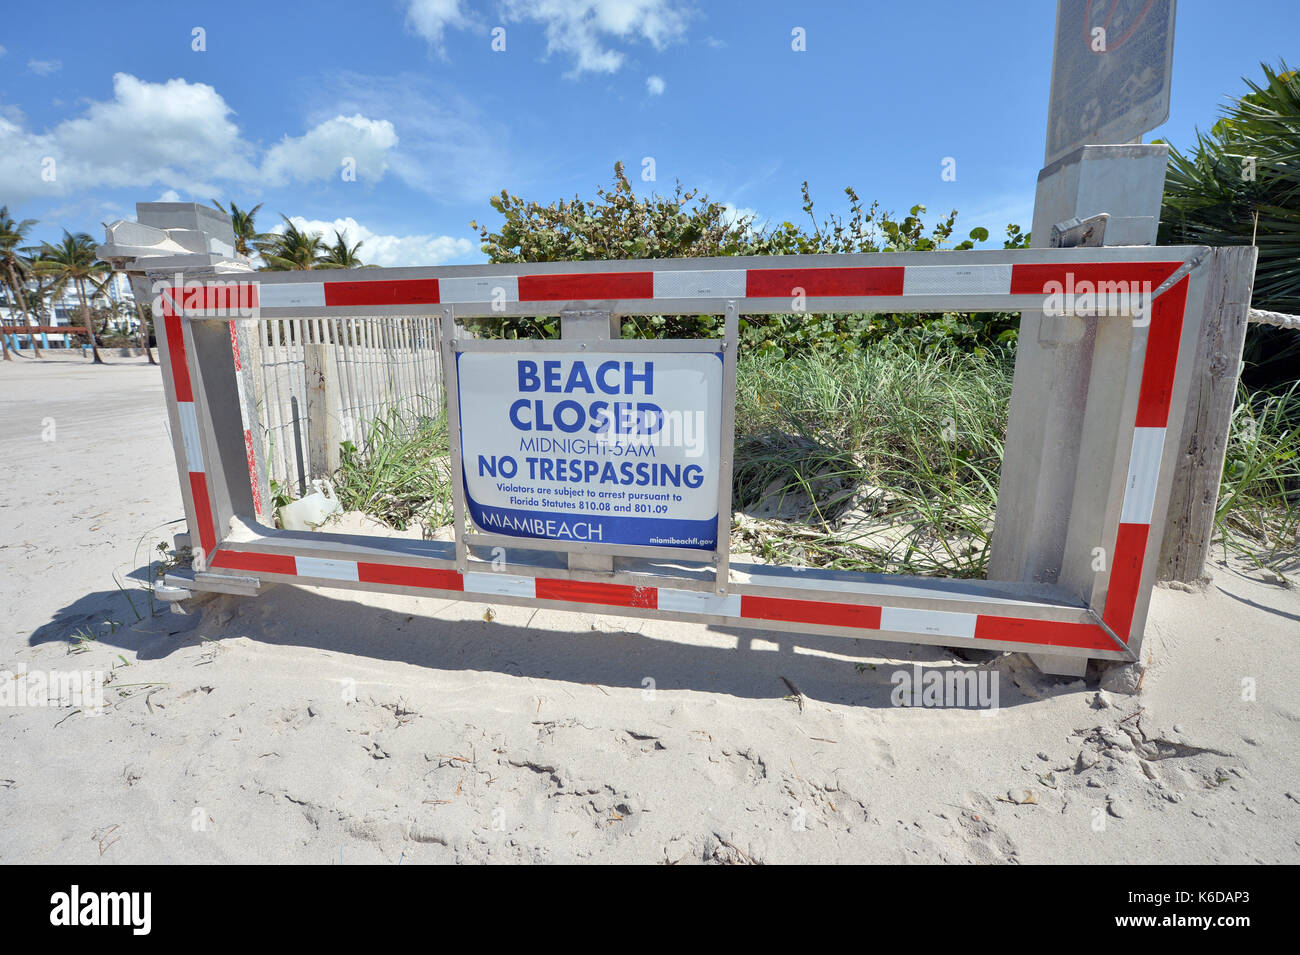 MIAMI BEACH, FL - SEPTEMBER 12: (EXCLUSIVE COVERAGE) ***NO NY DAILIES*** Residents waited hours to get over the causeway to return to South Beach after a mandatory evacuation only to find the Effects of Extreme Category 5 Hurricane Irma. The beach, Ocean Drive, Collins Ave, Miami Marina and even the Miami Port which are always packed with people, boats and cruise ships were all empty and had almost an erie dead calm to it as millatary black hawk helicopters patrolled the beaches as residents returned to their home's and business on September 12, 2017 in Miami Beach, Florida People: Ocean Stock Photo